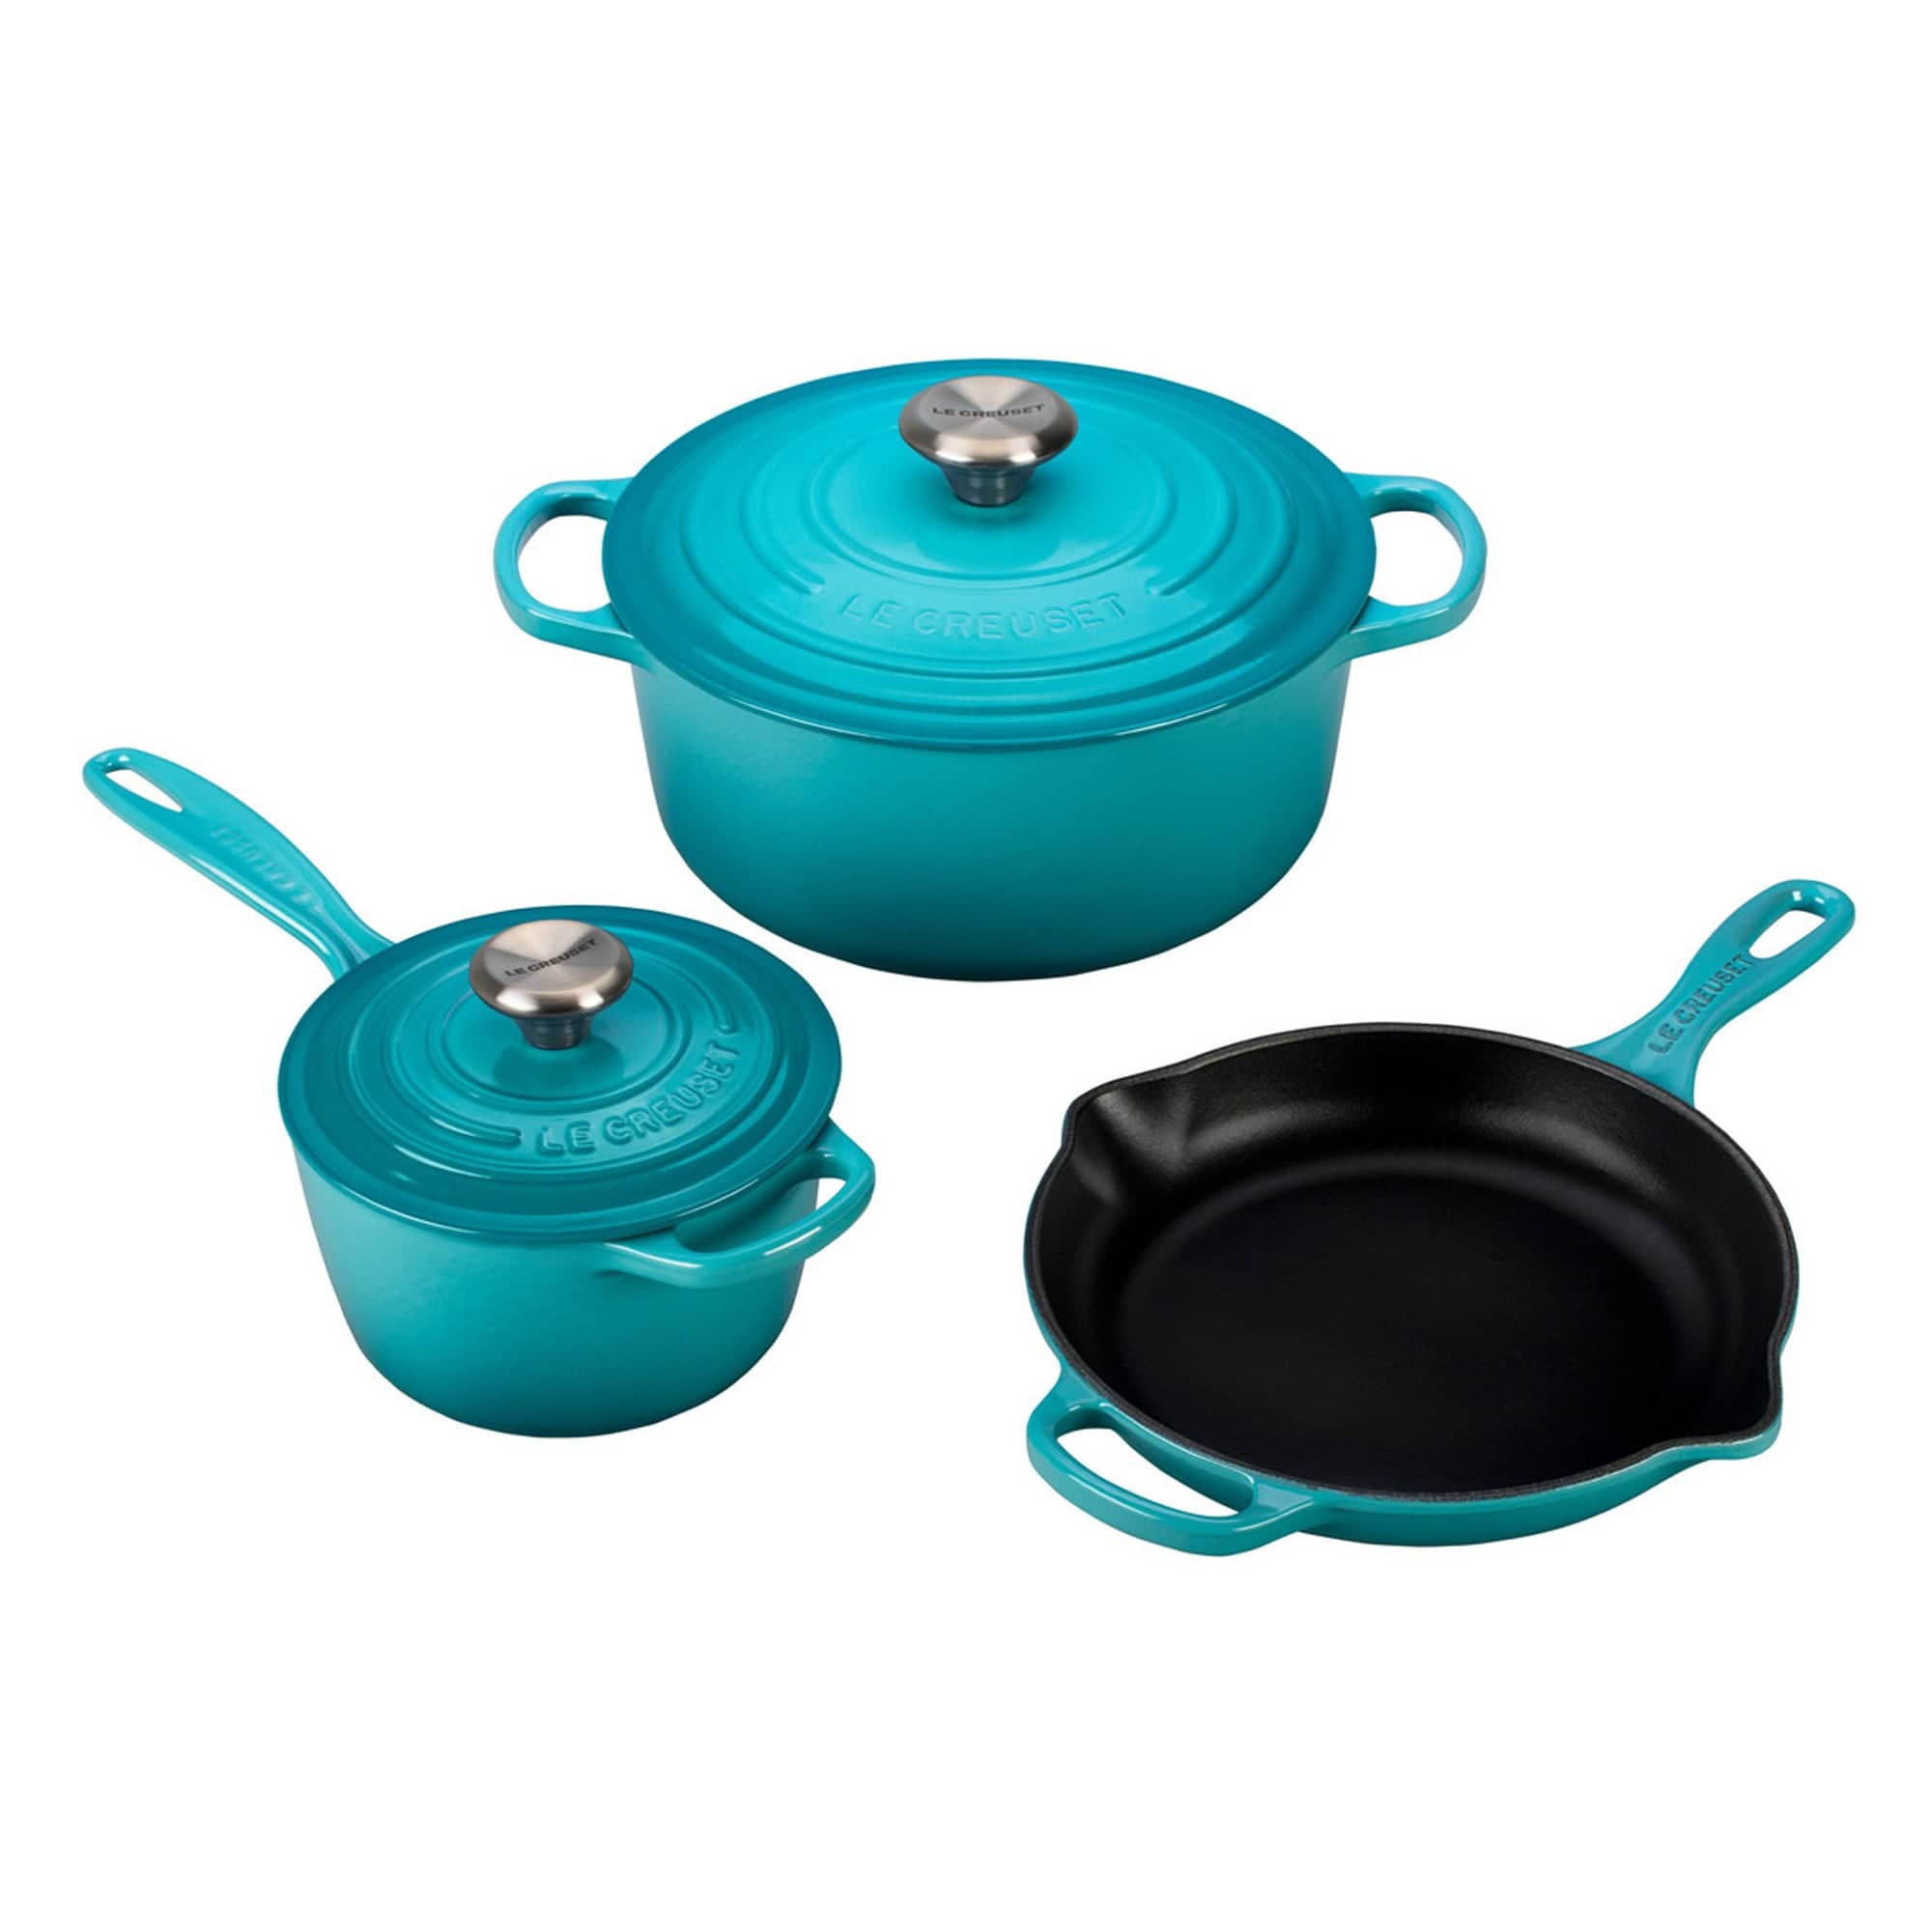 The Best Enameled Cast Iron Cookware